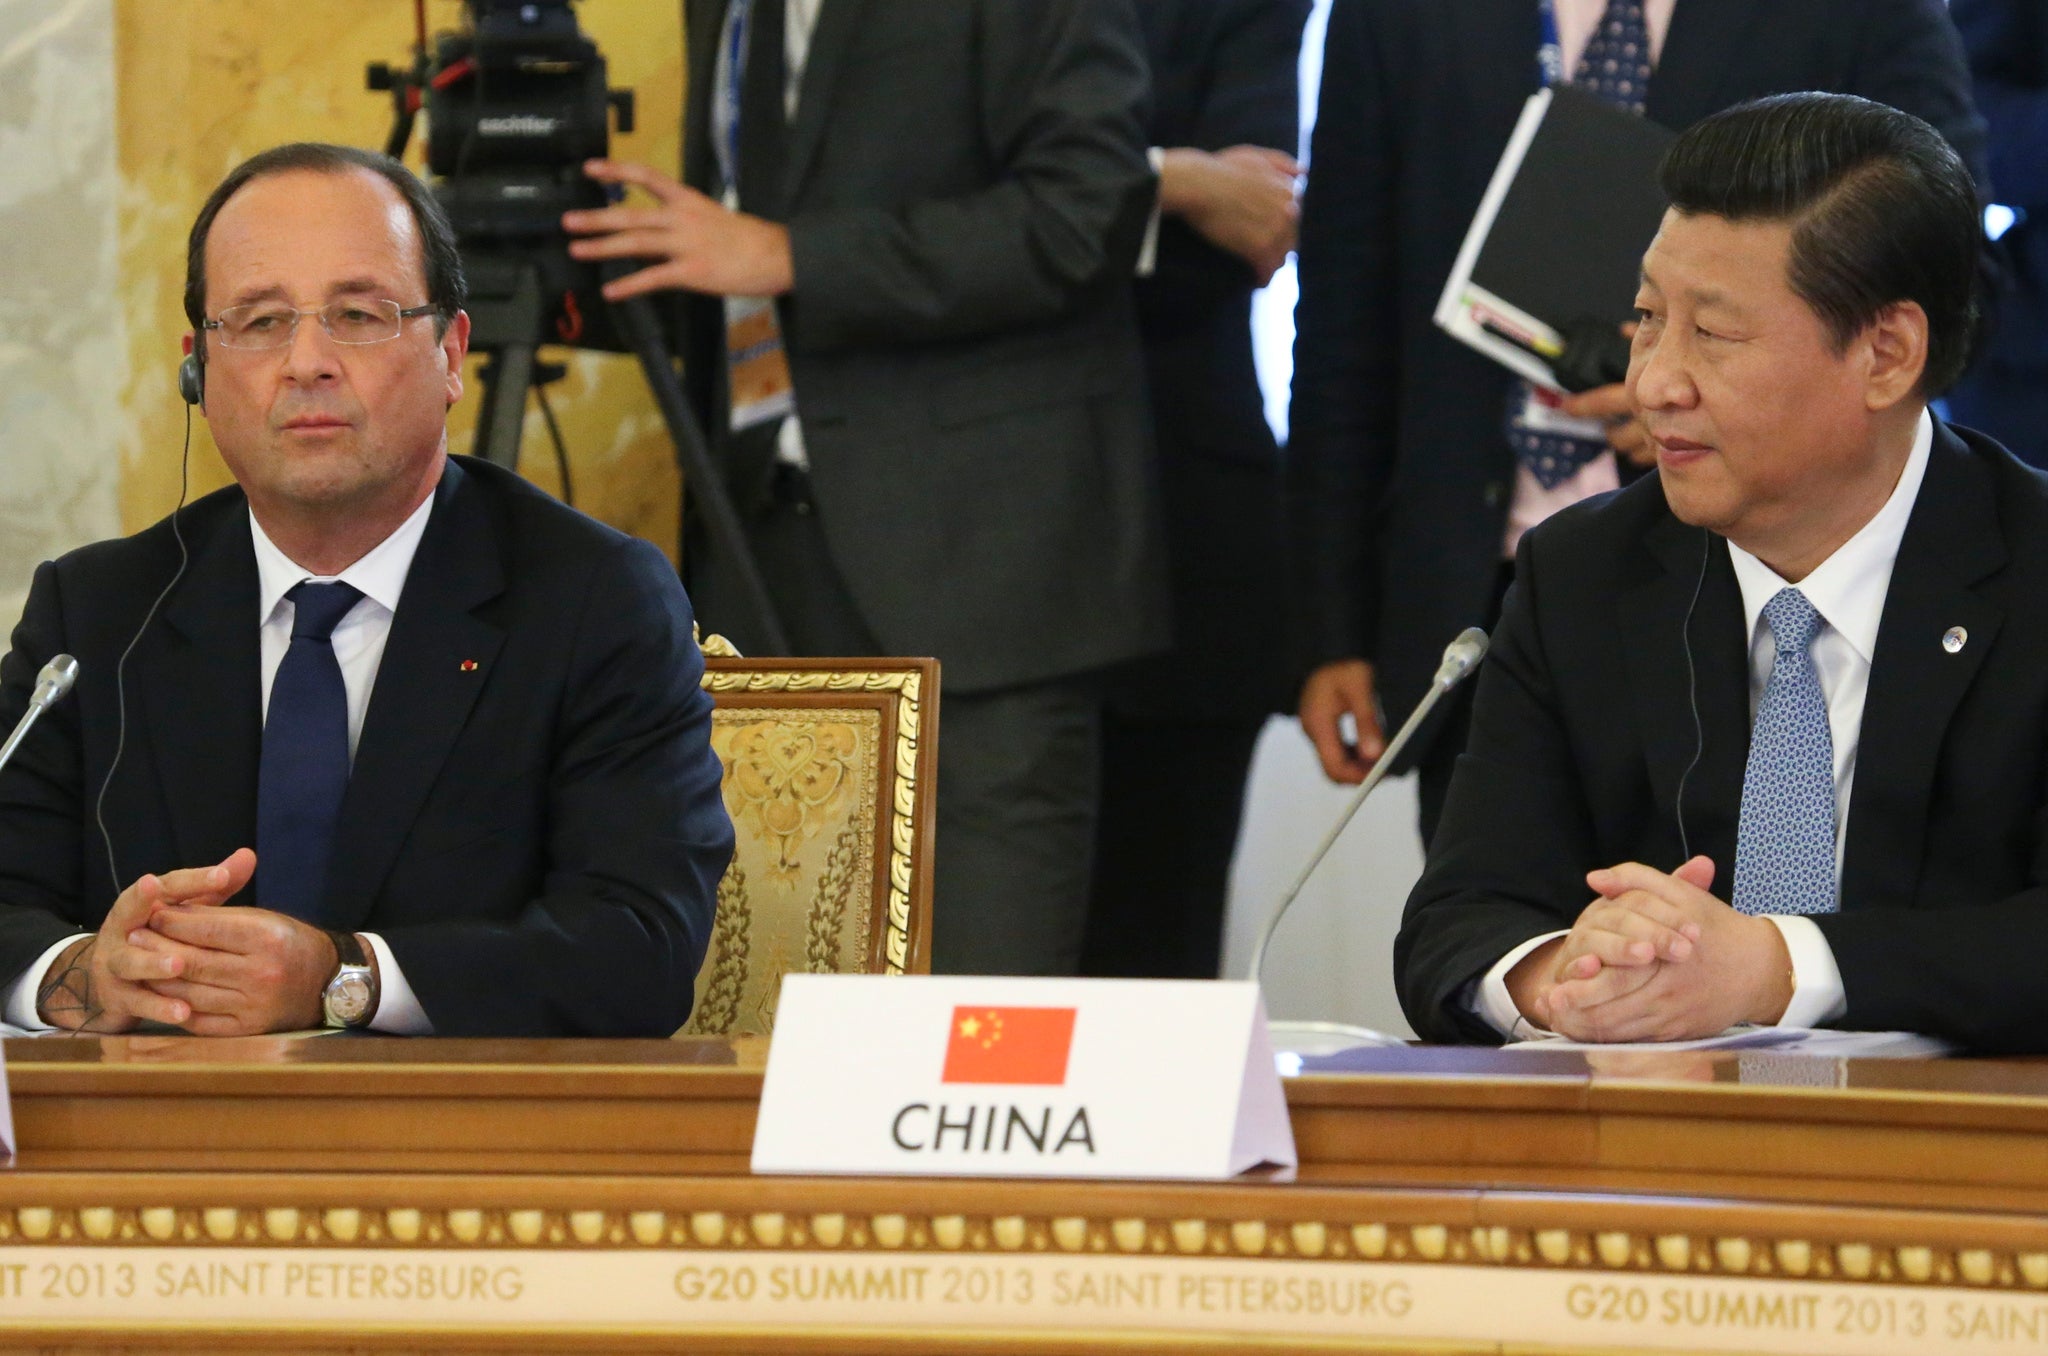 French President Francois Hollande and Chinese President Xi Jinping at the G20 Summit in St. Petersburg, September 5, 2013.